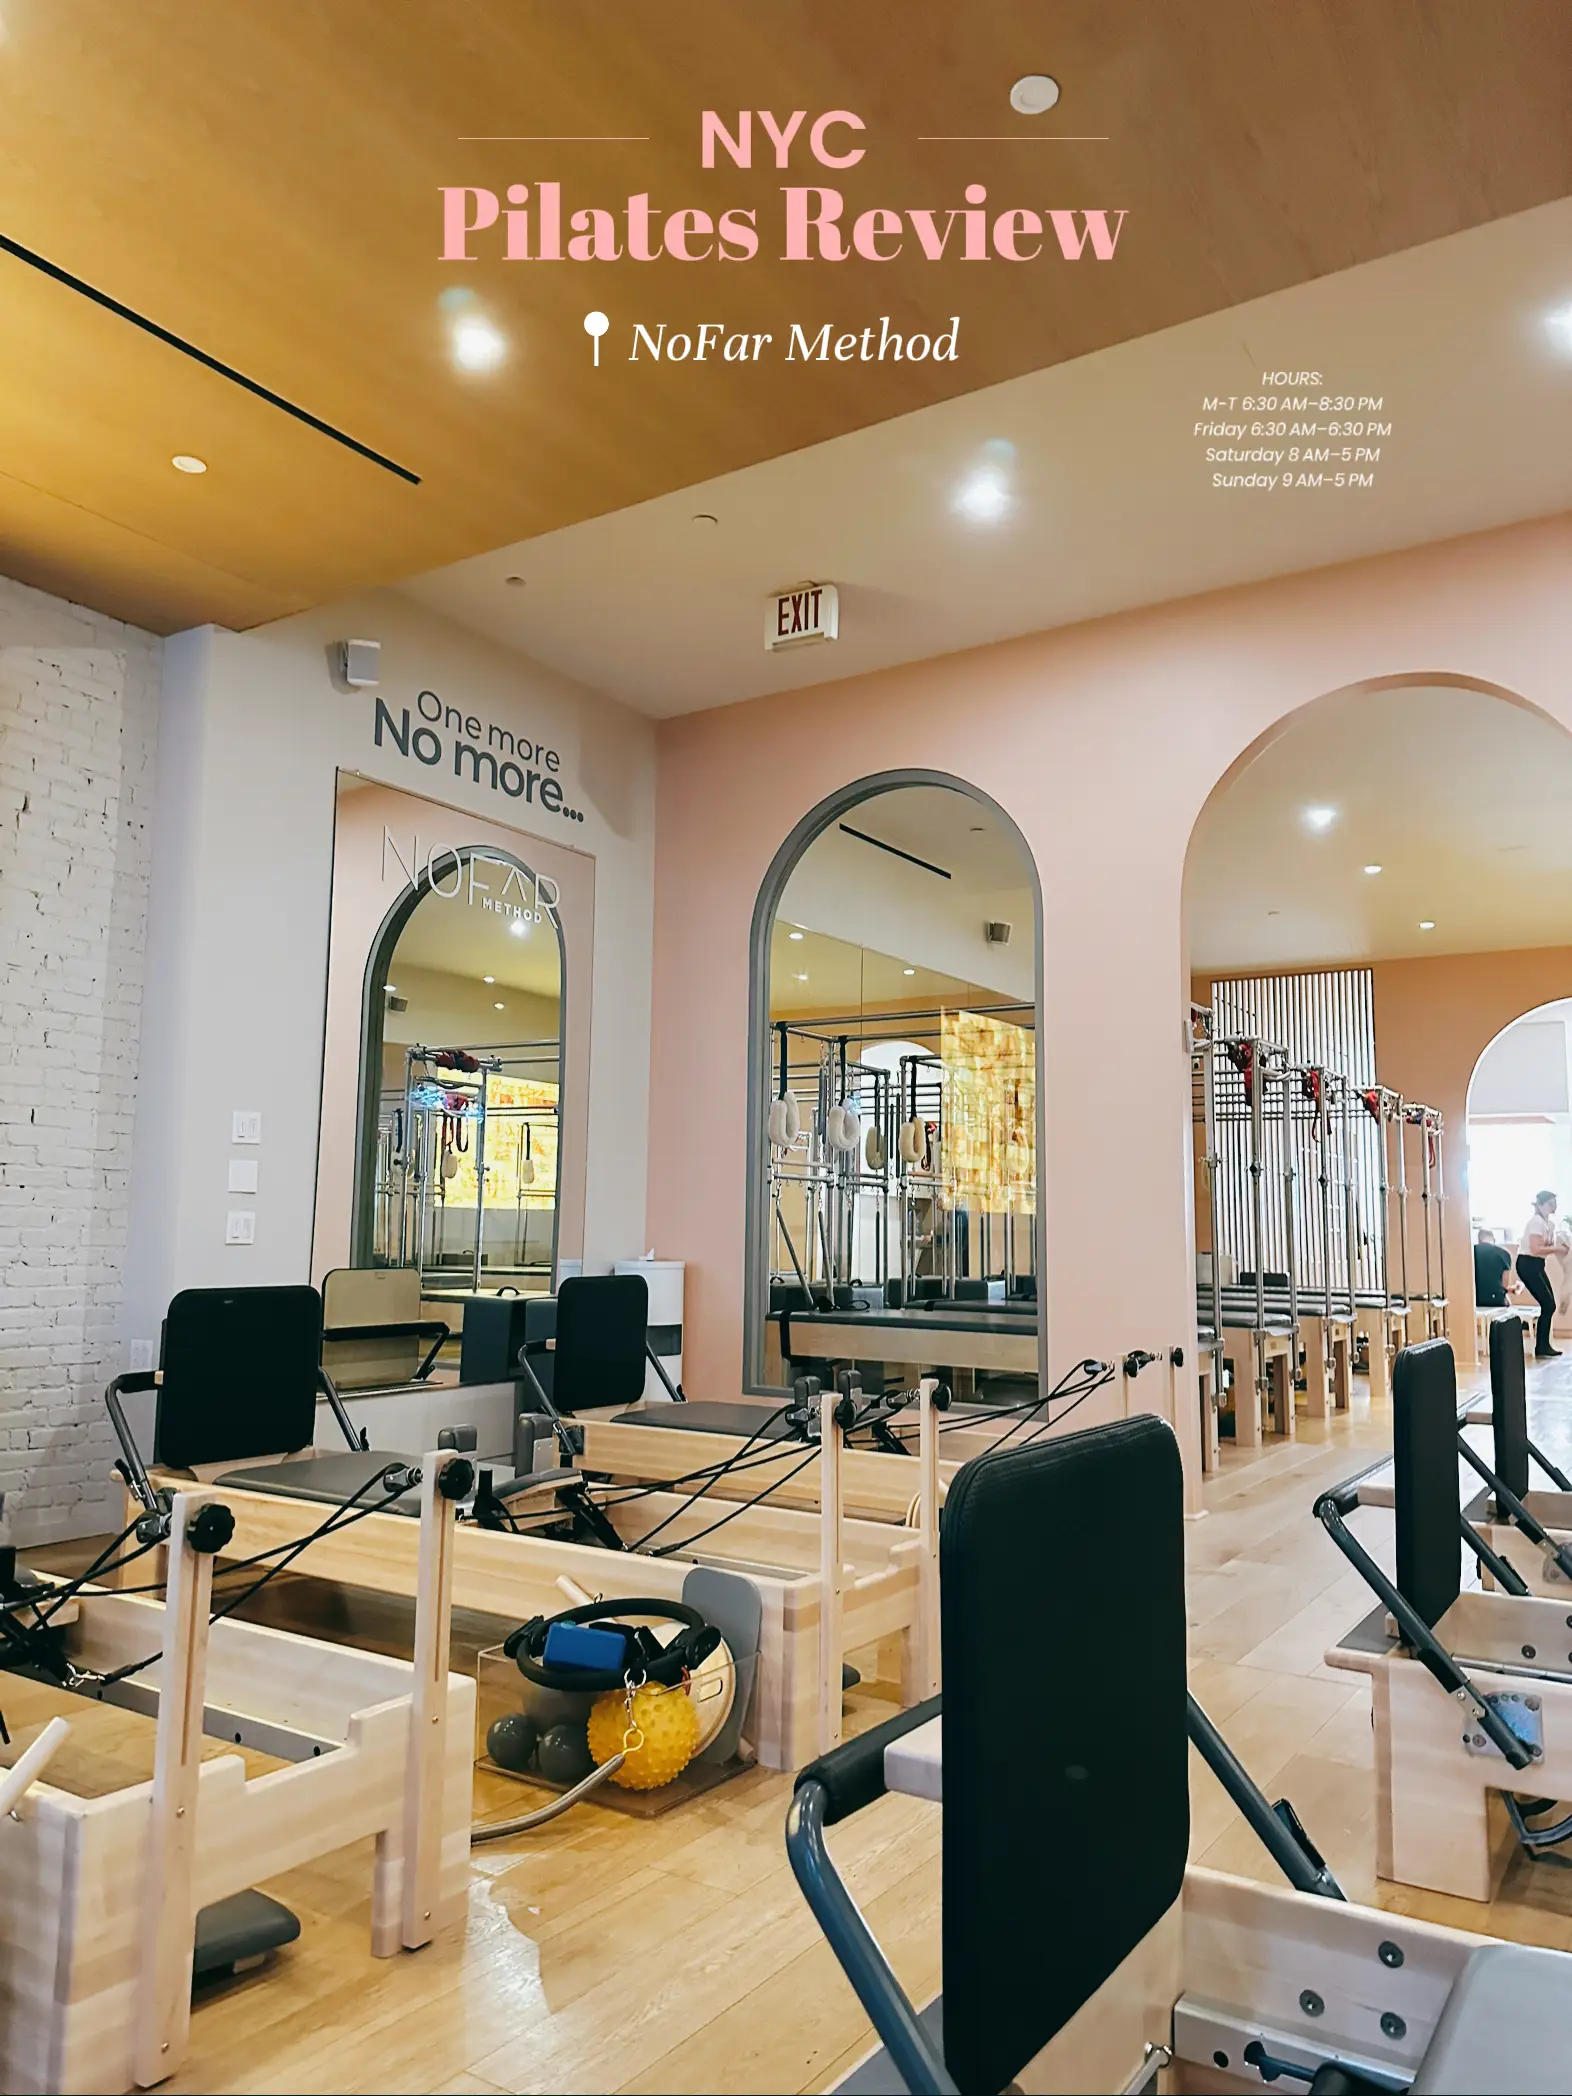 NYC PILATES REVIEW SOHO, Gallery posted by Jordyn Friedman